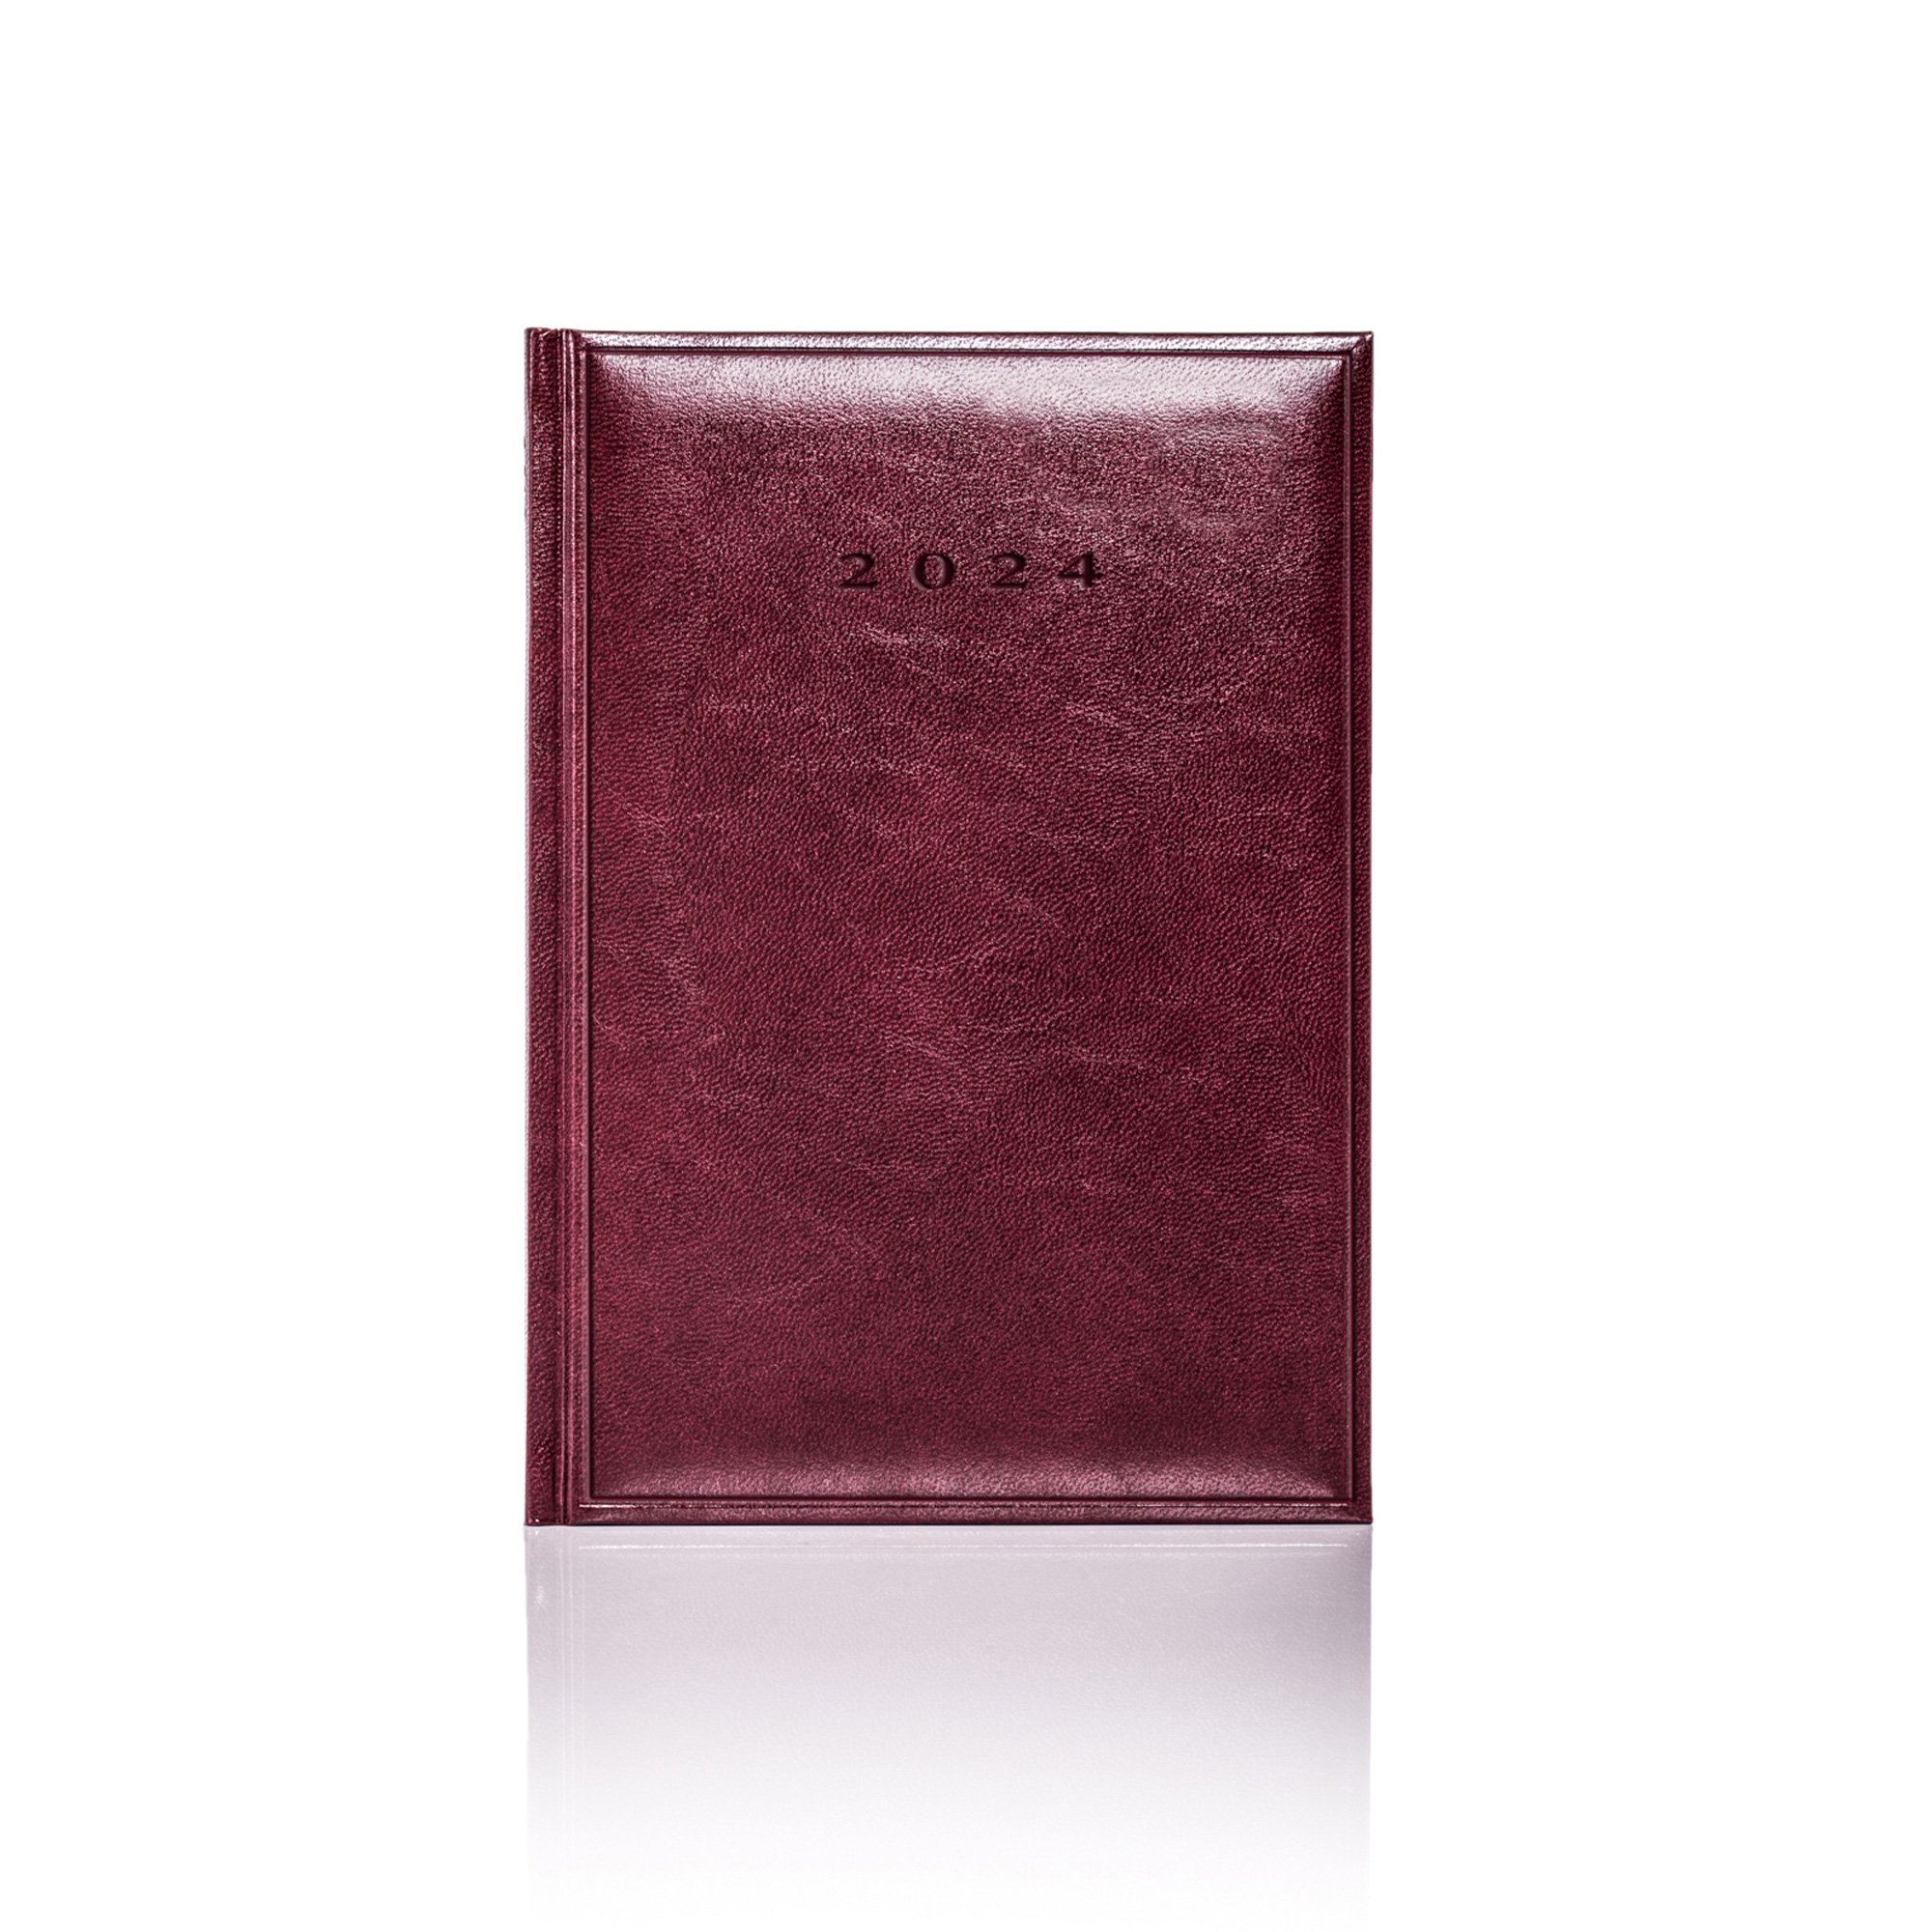 Colombia A5 Daily Diary in burgundy with blind embossed date.